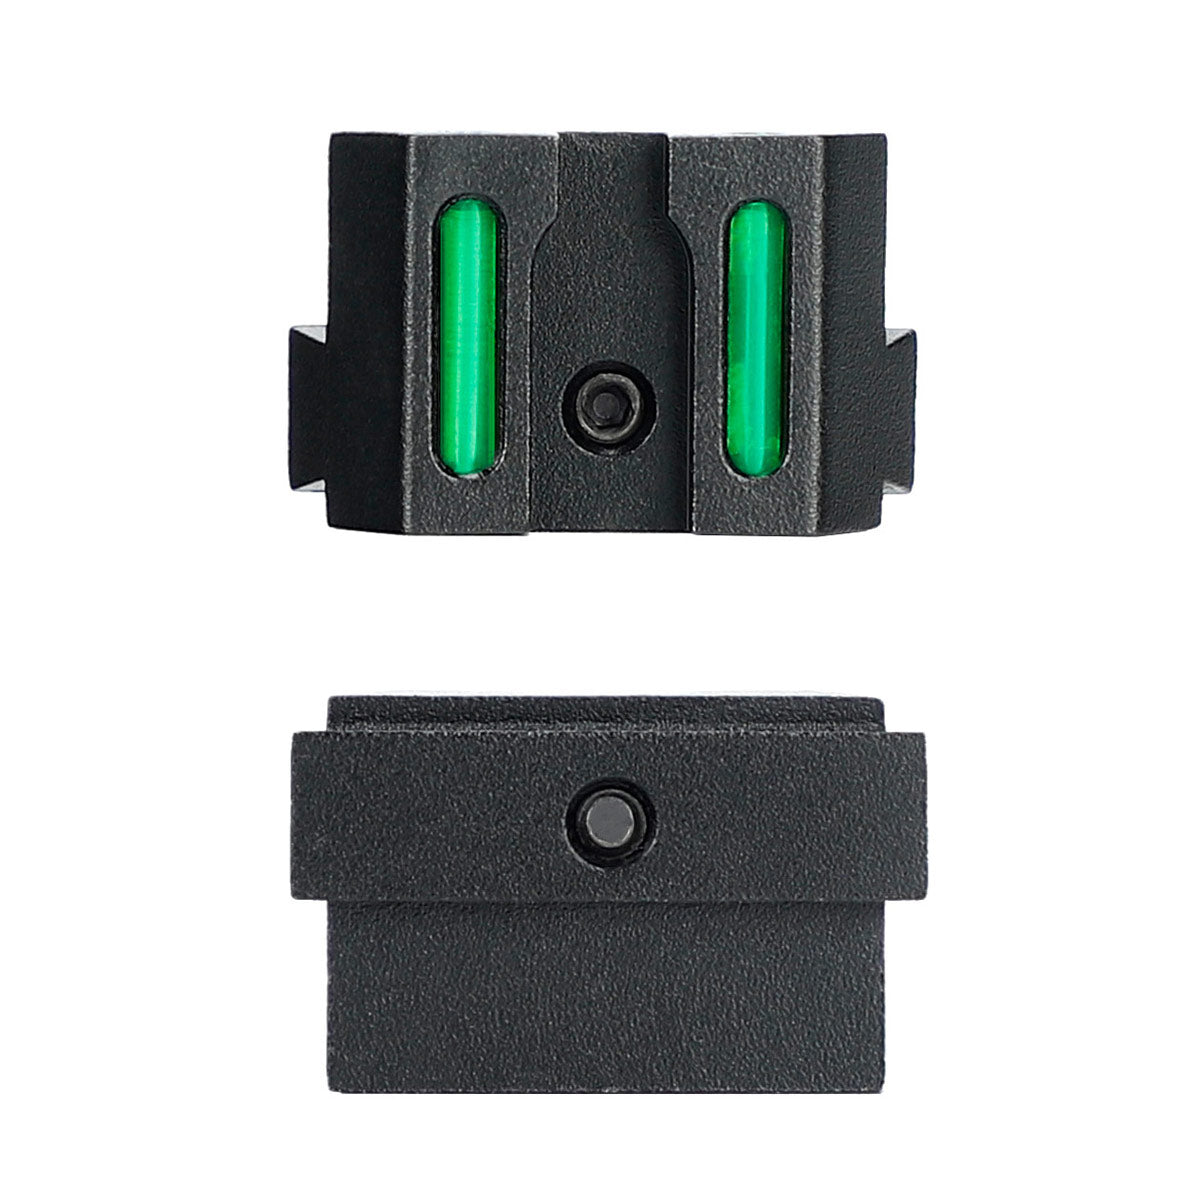 ohhunt® Green Red Fiber Optic Sight Front & Rear Sights for Glock Pistols 17L, 19, 22, 23, 24, 26, 27, 33, 34, 35, 38 and 39